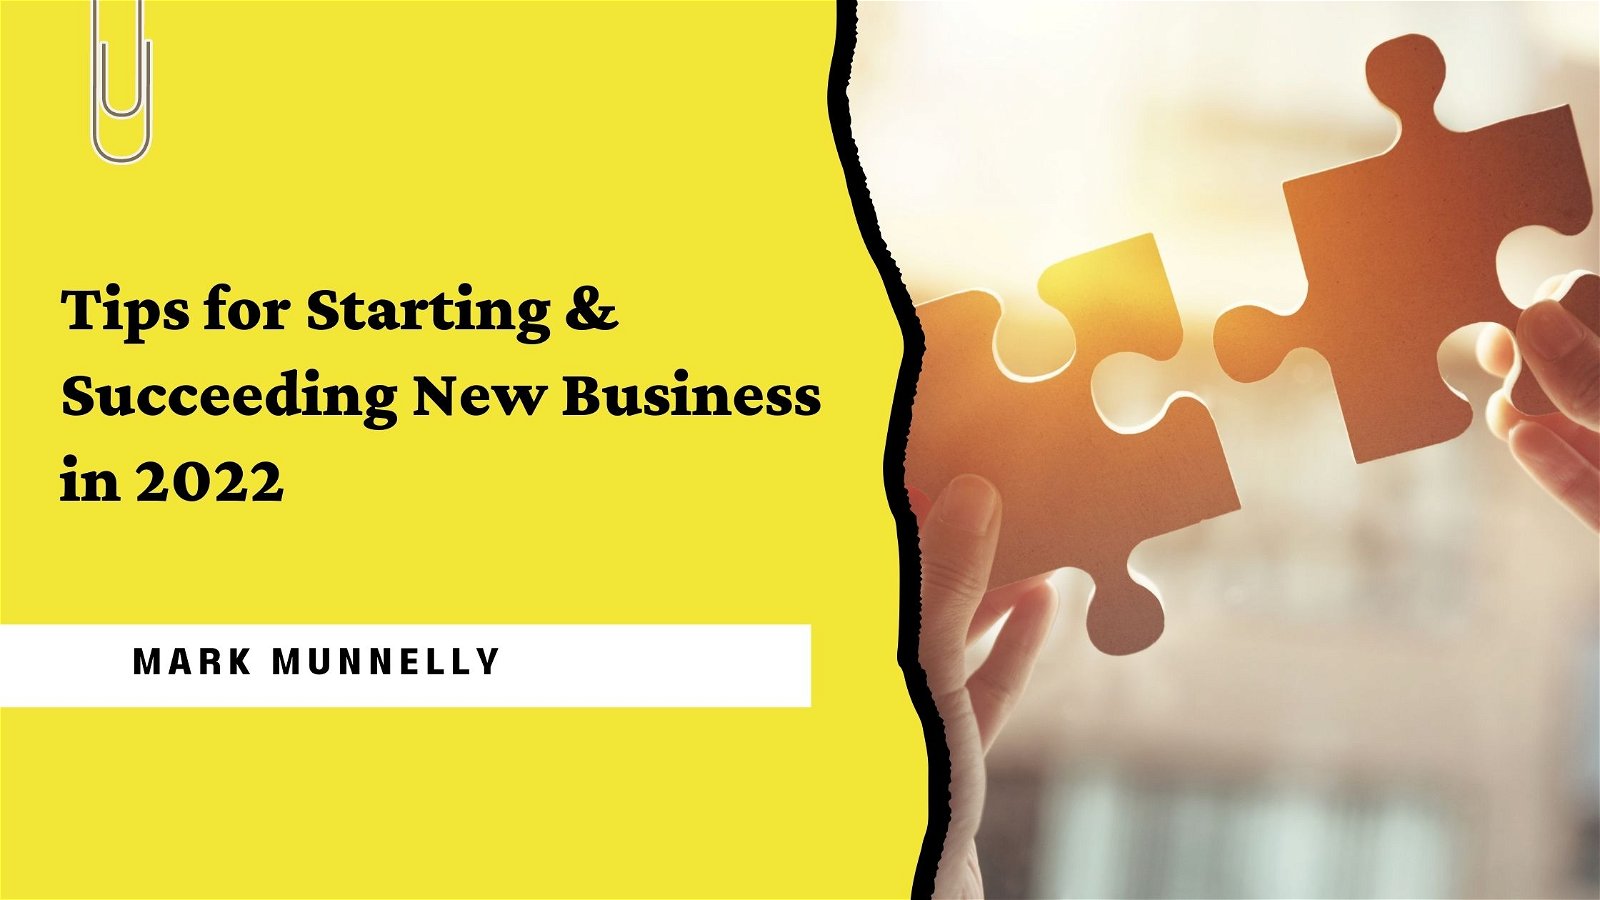 Tips for starting and succeeding new business in 2022